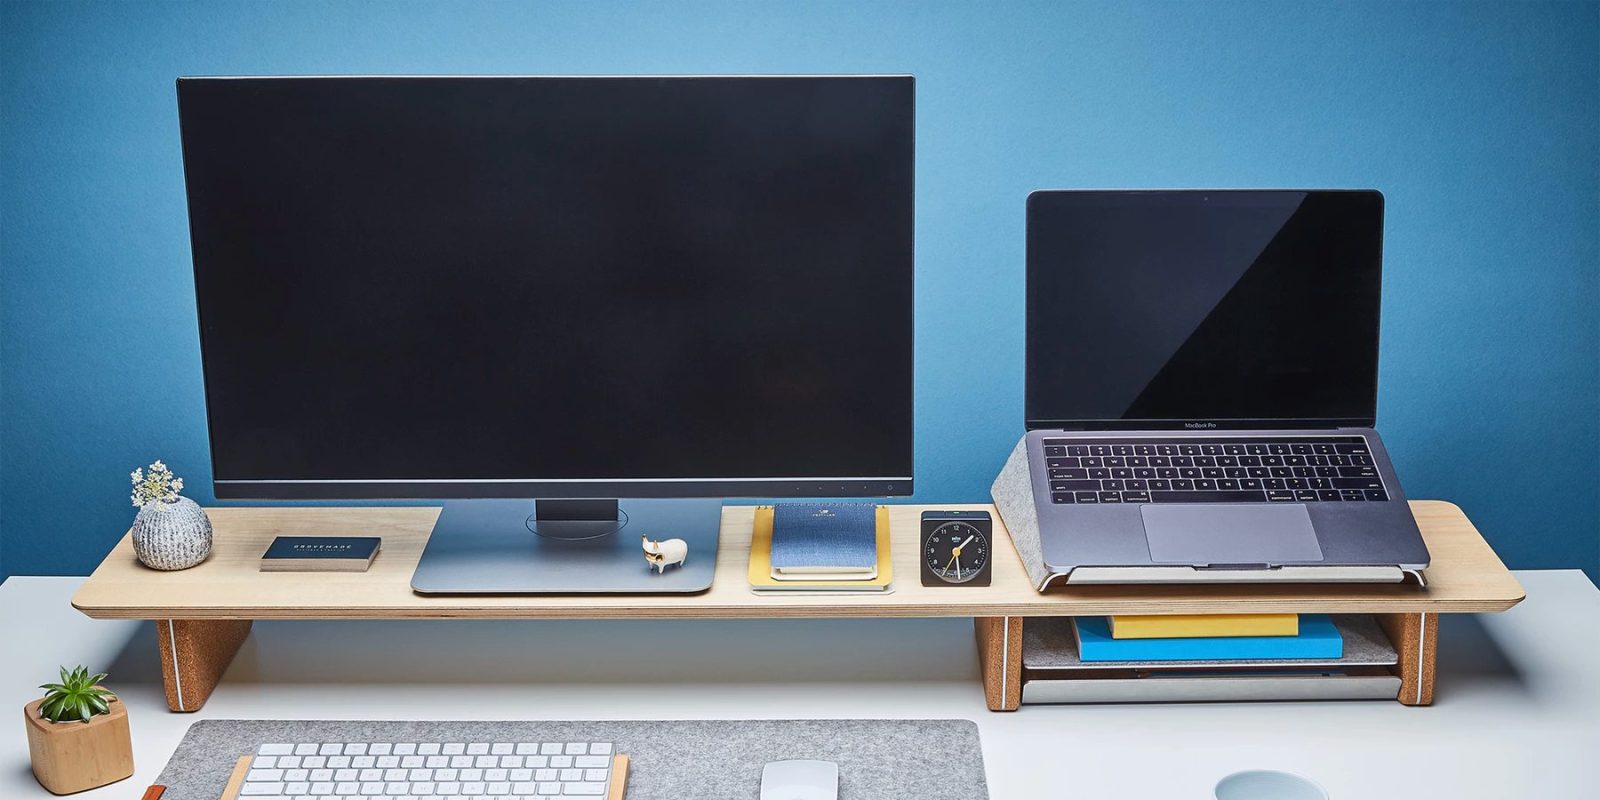 Grovemade S New Desk Shelf System Brings Organization To Your